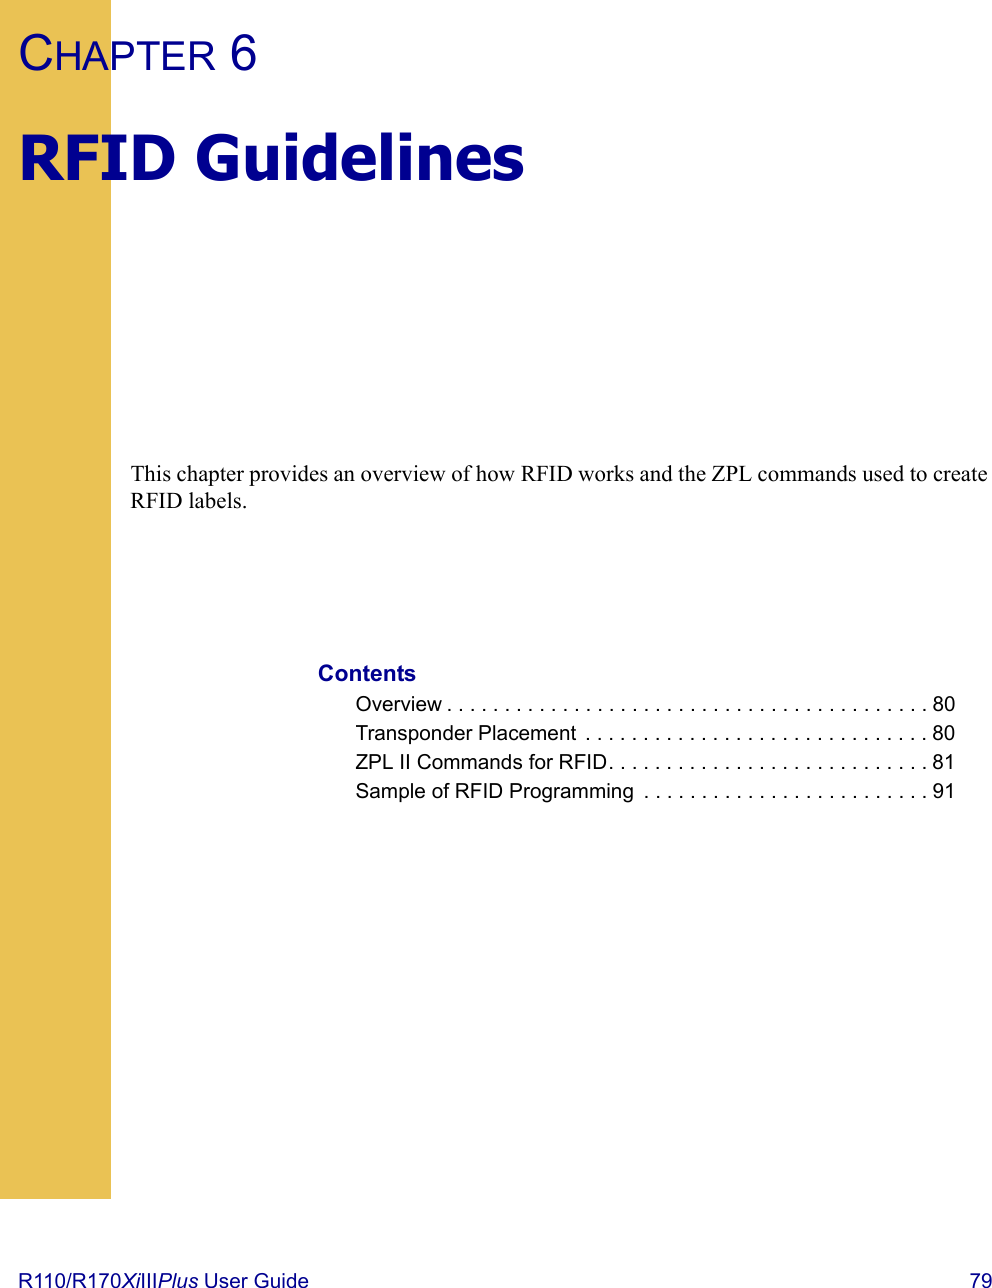 R110/R170XiIIIPlus User Guide  79CHAPTER 6RFID GuidelinesThis chapter provides an overview of how RFID works and the ZPL commands used to create RFID labels.ContentsOverview . . . . . . . . . . . . . . . . . . . . . . . . . . . . . . . . . . . . . . . . . . 80Transponder Placement  . . . . . . . . . . . . . . . . . . . . . . . . . . . . . . 80ZPL II Commands for RFID. . . . . . . . . . . . . . . . . . . . . . . . . . . . 81Sample of RFID Programming  . . . . . . . . . . . . . . . . . . . . . . . . . 91